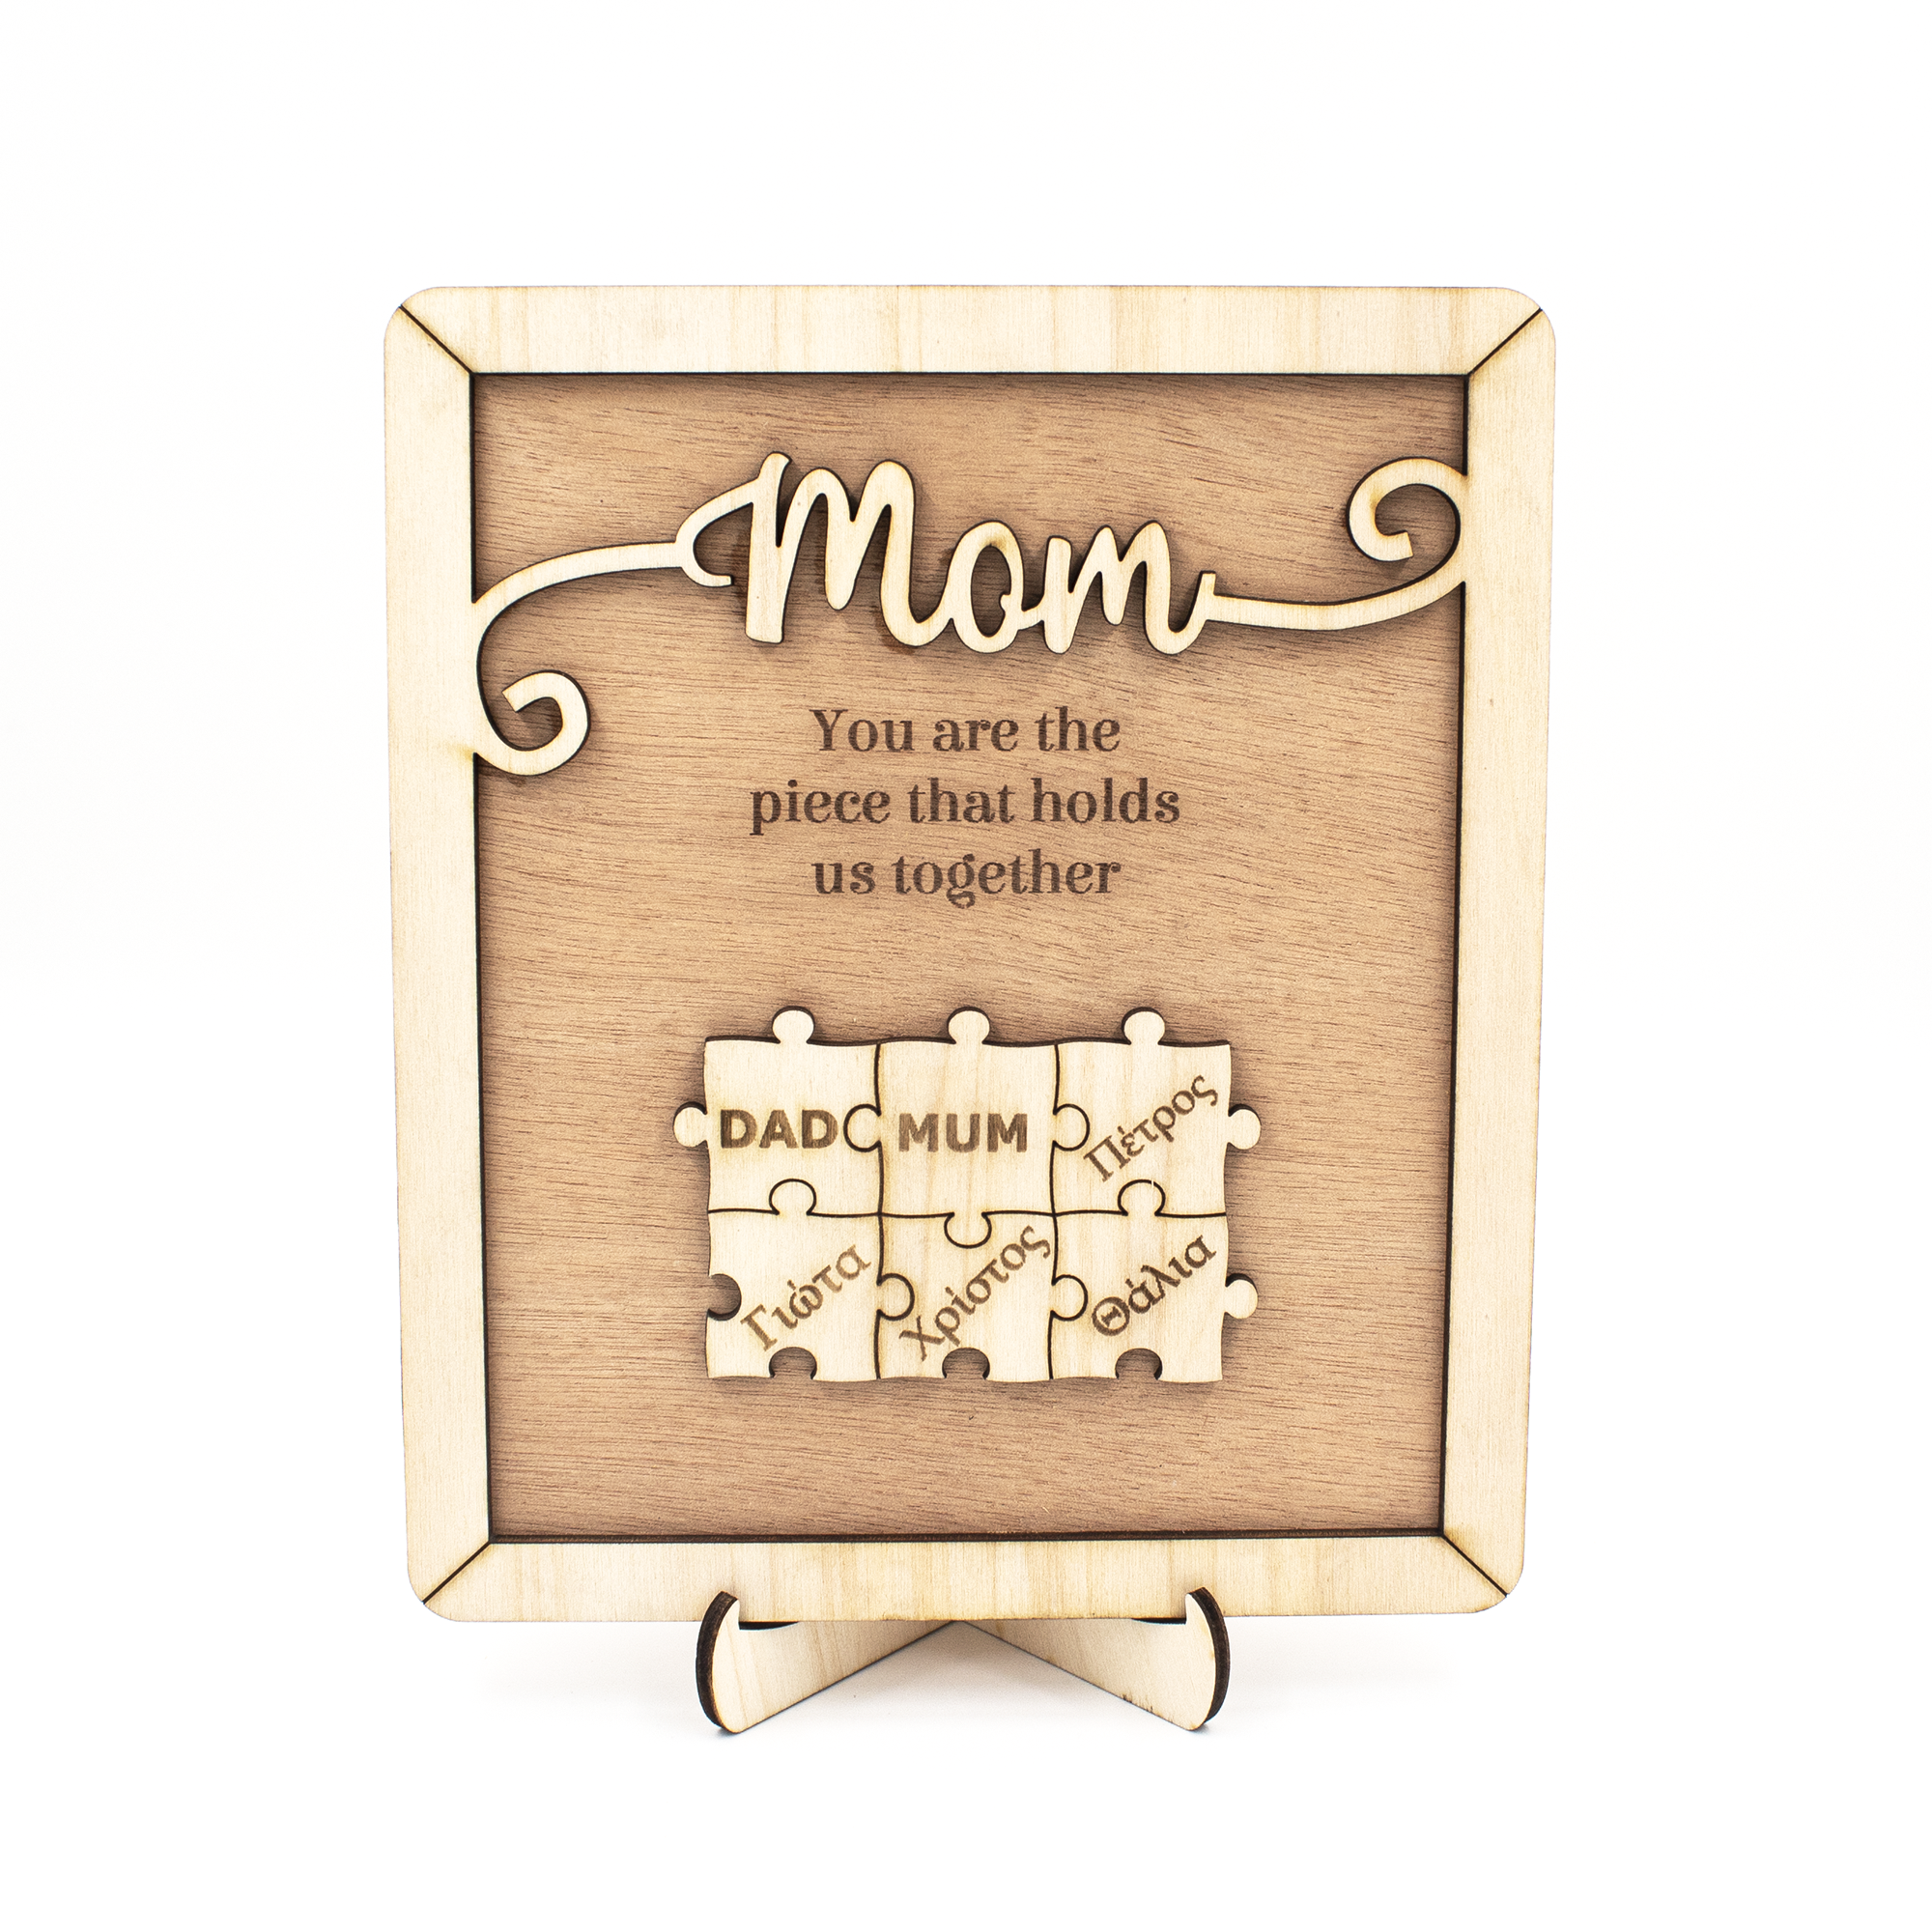 Puzzle Mother's Gift Plaque - high-quality wood puzzle with base - reveals heartfelt message of love and appreciation - perfect thoughtful keepsake.